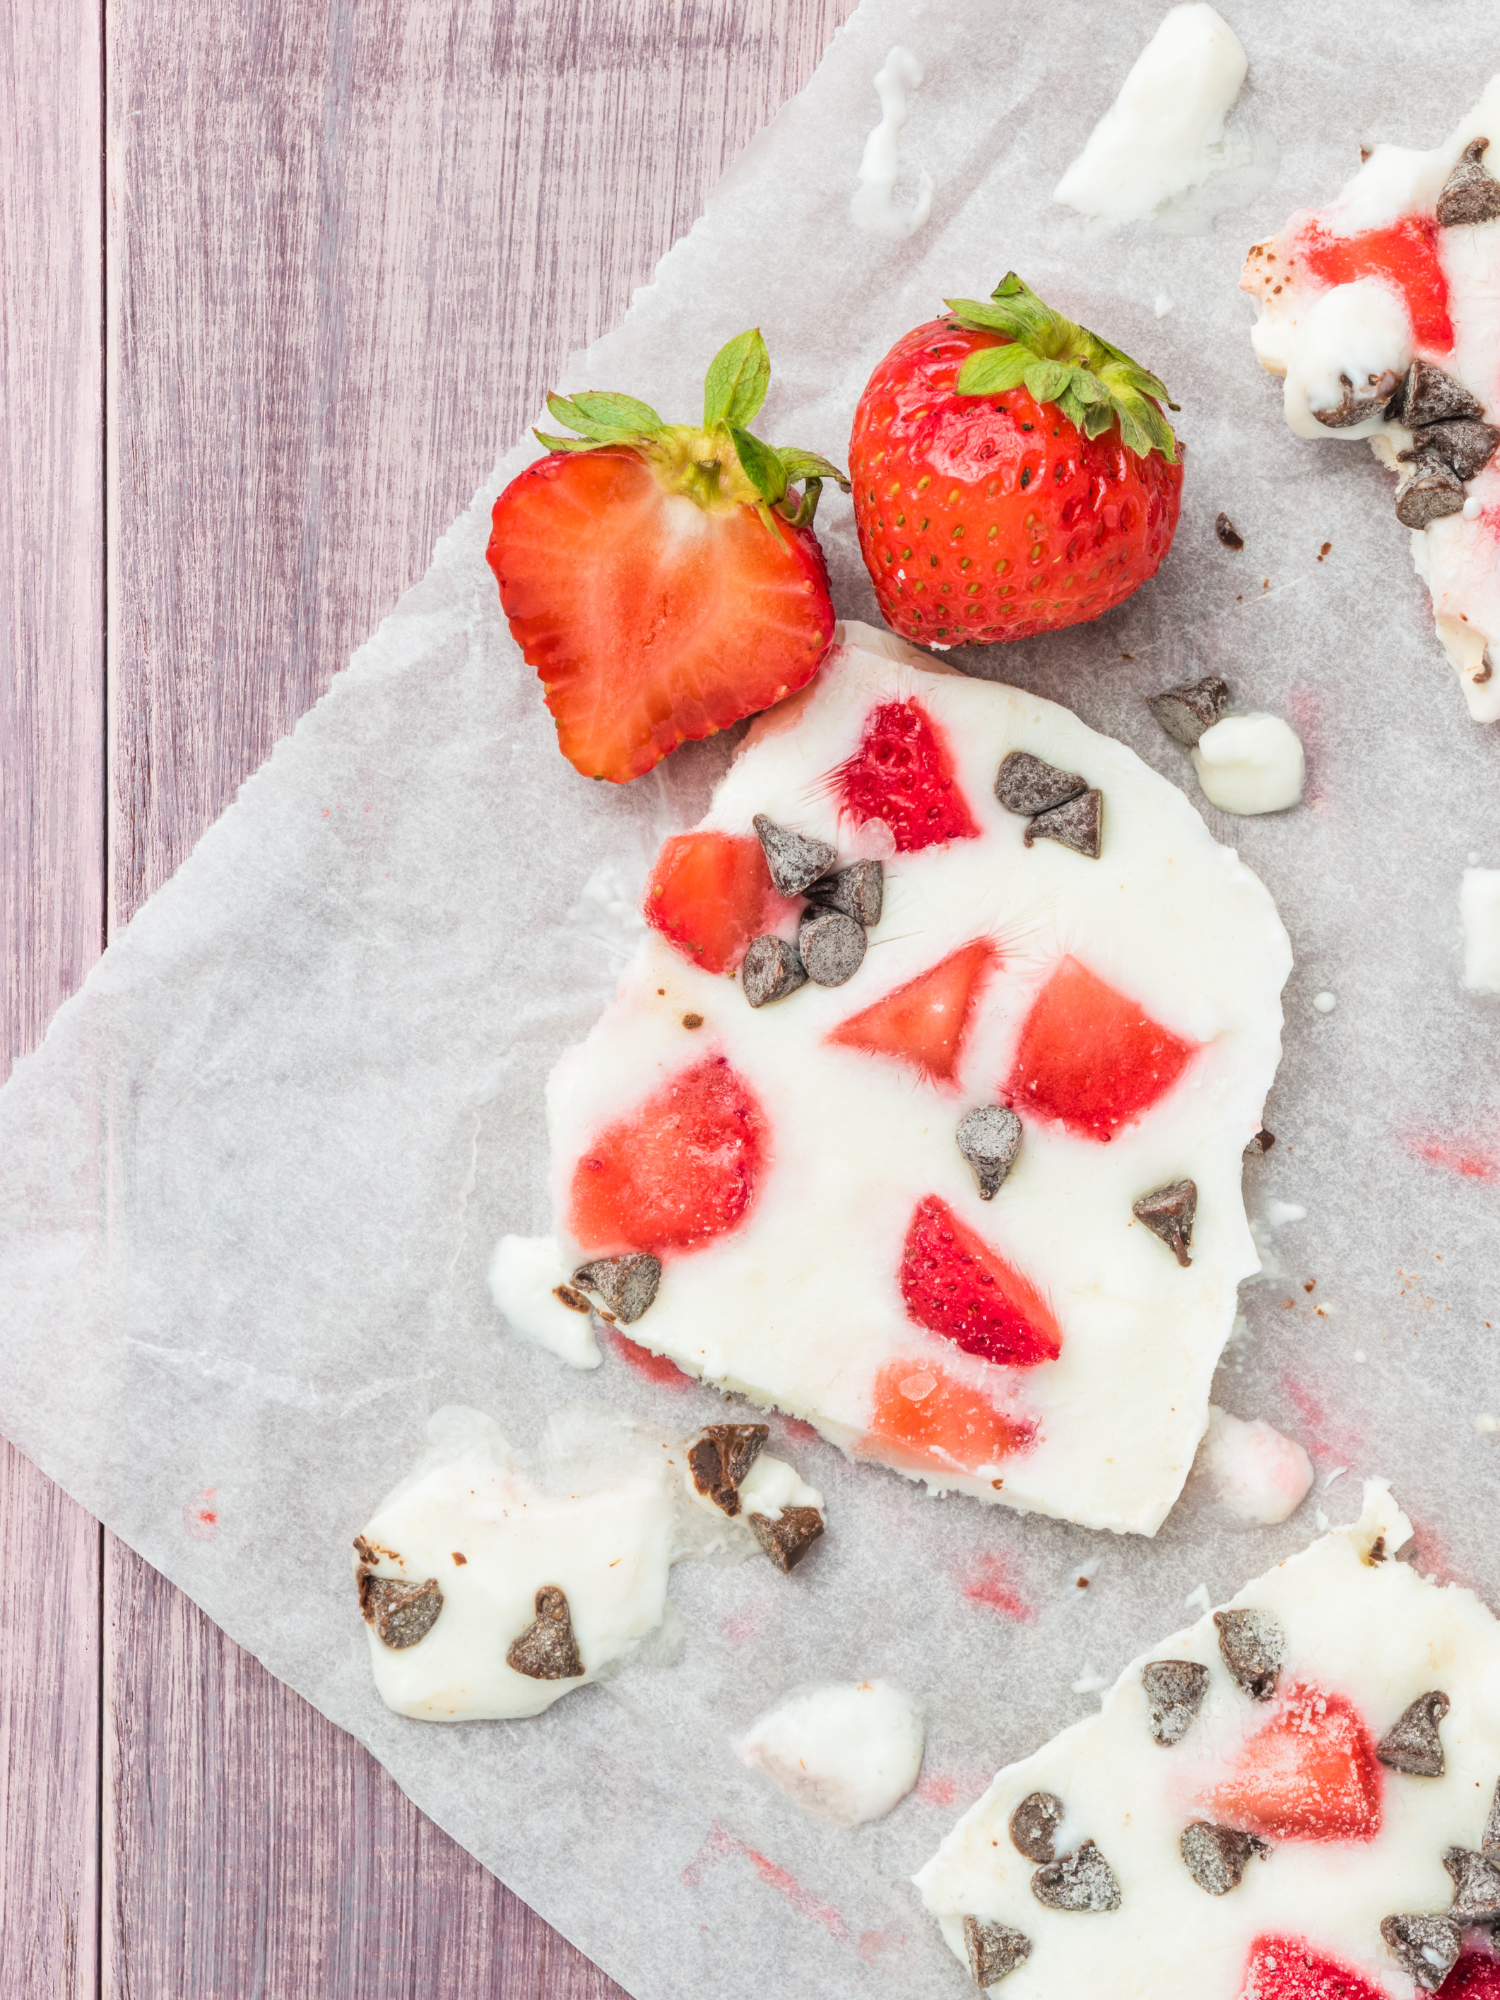 creamy yogurt bark with strawberries and chocolate chips sitting on a piece of parchment